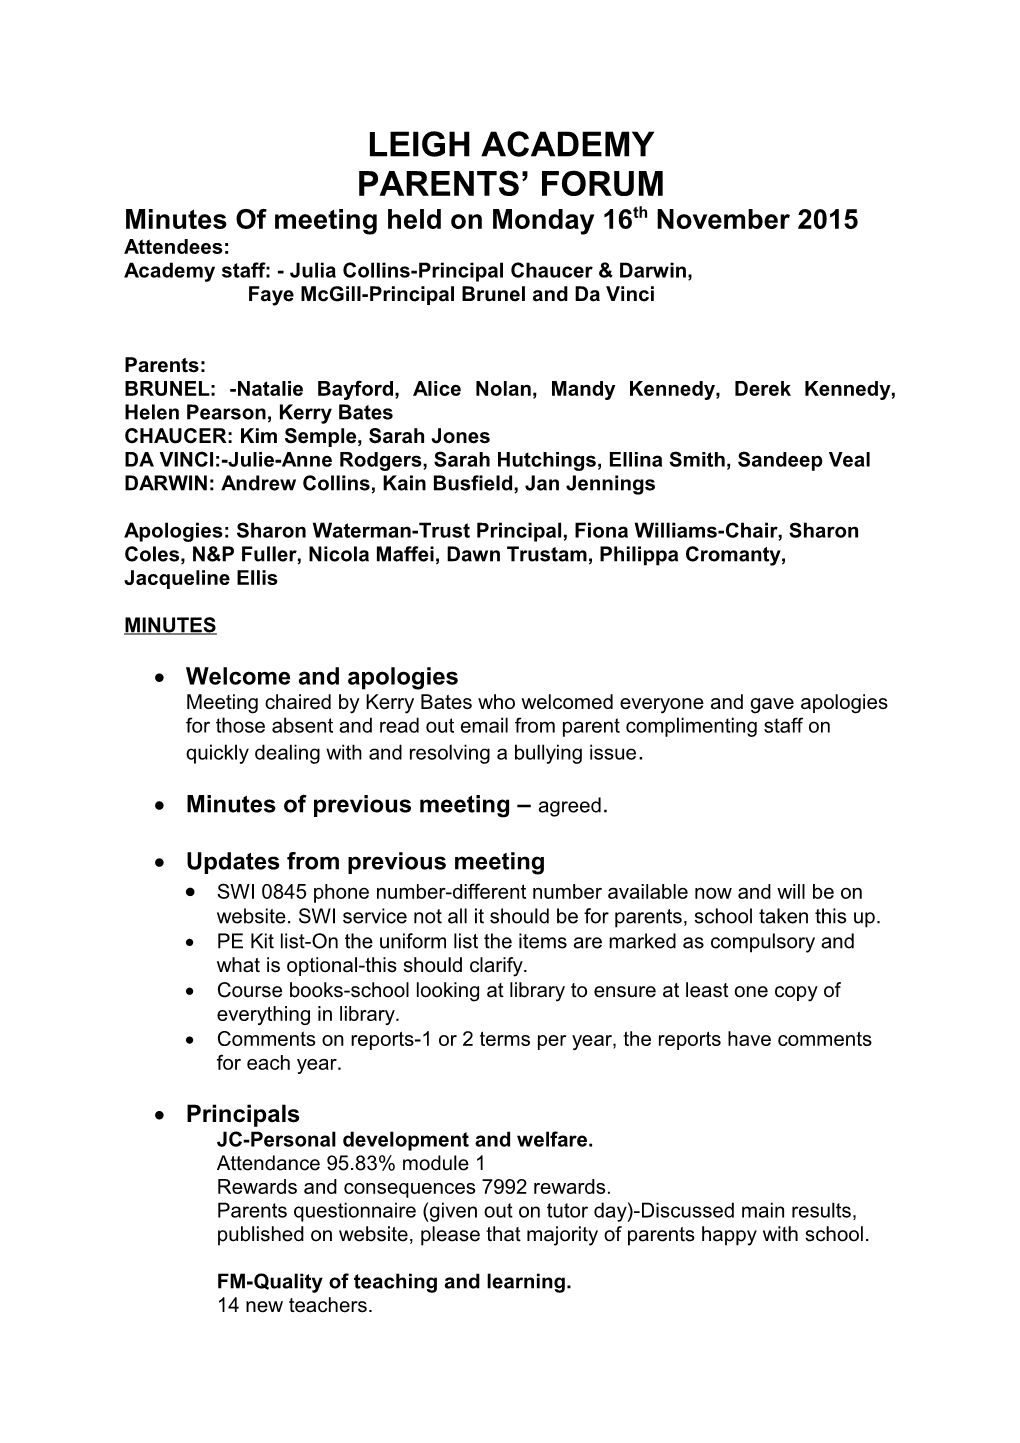 Minutes of Meeting Held on Monday 16Th November 2015